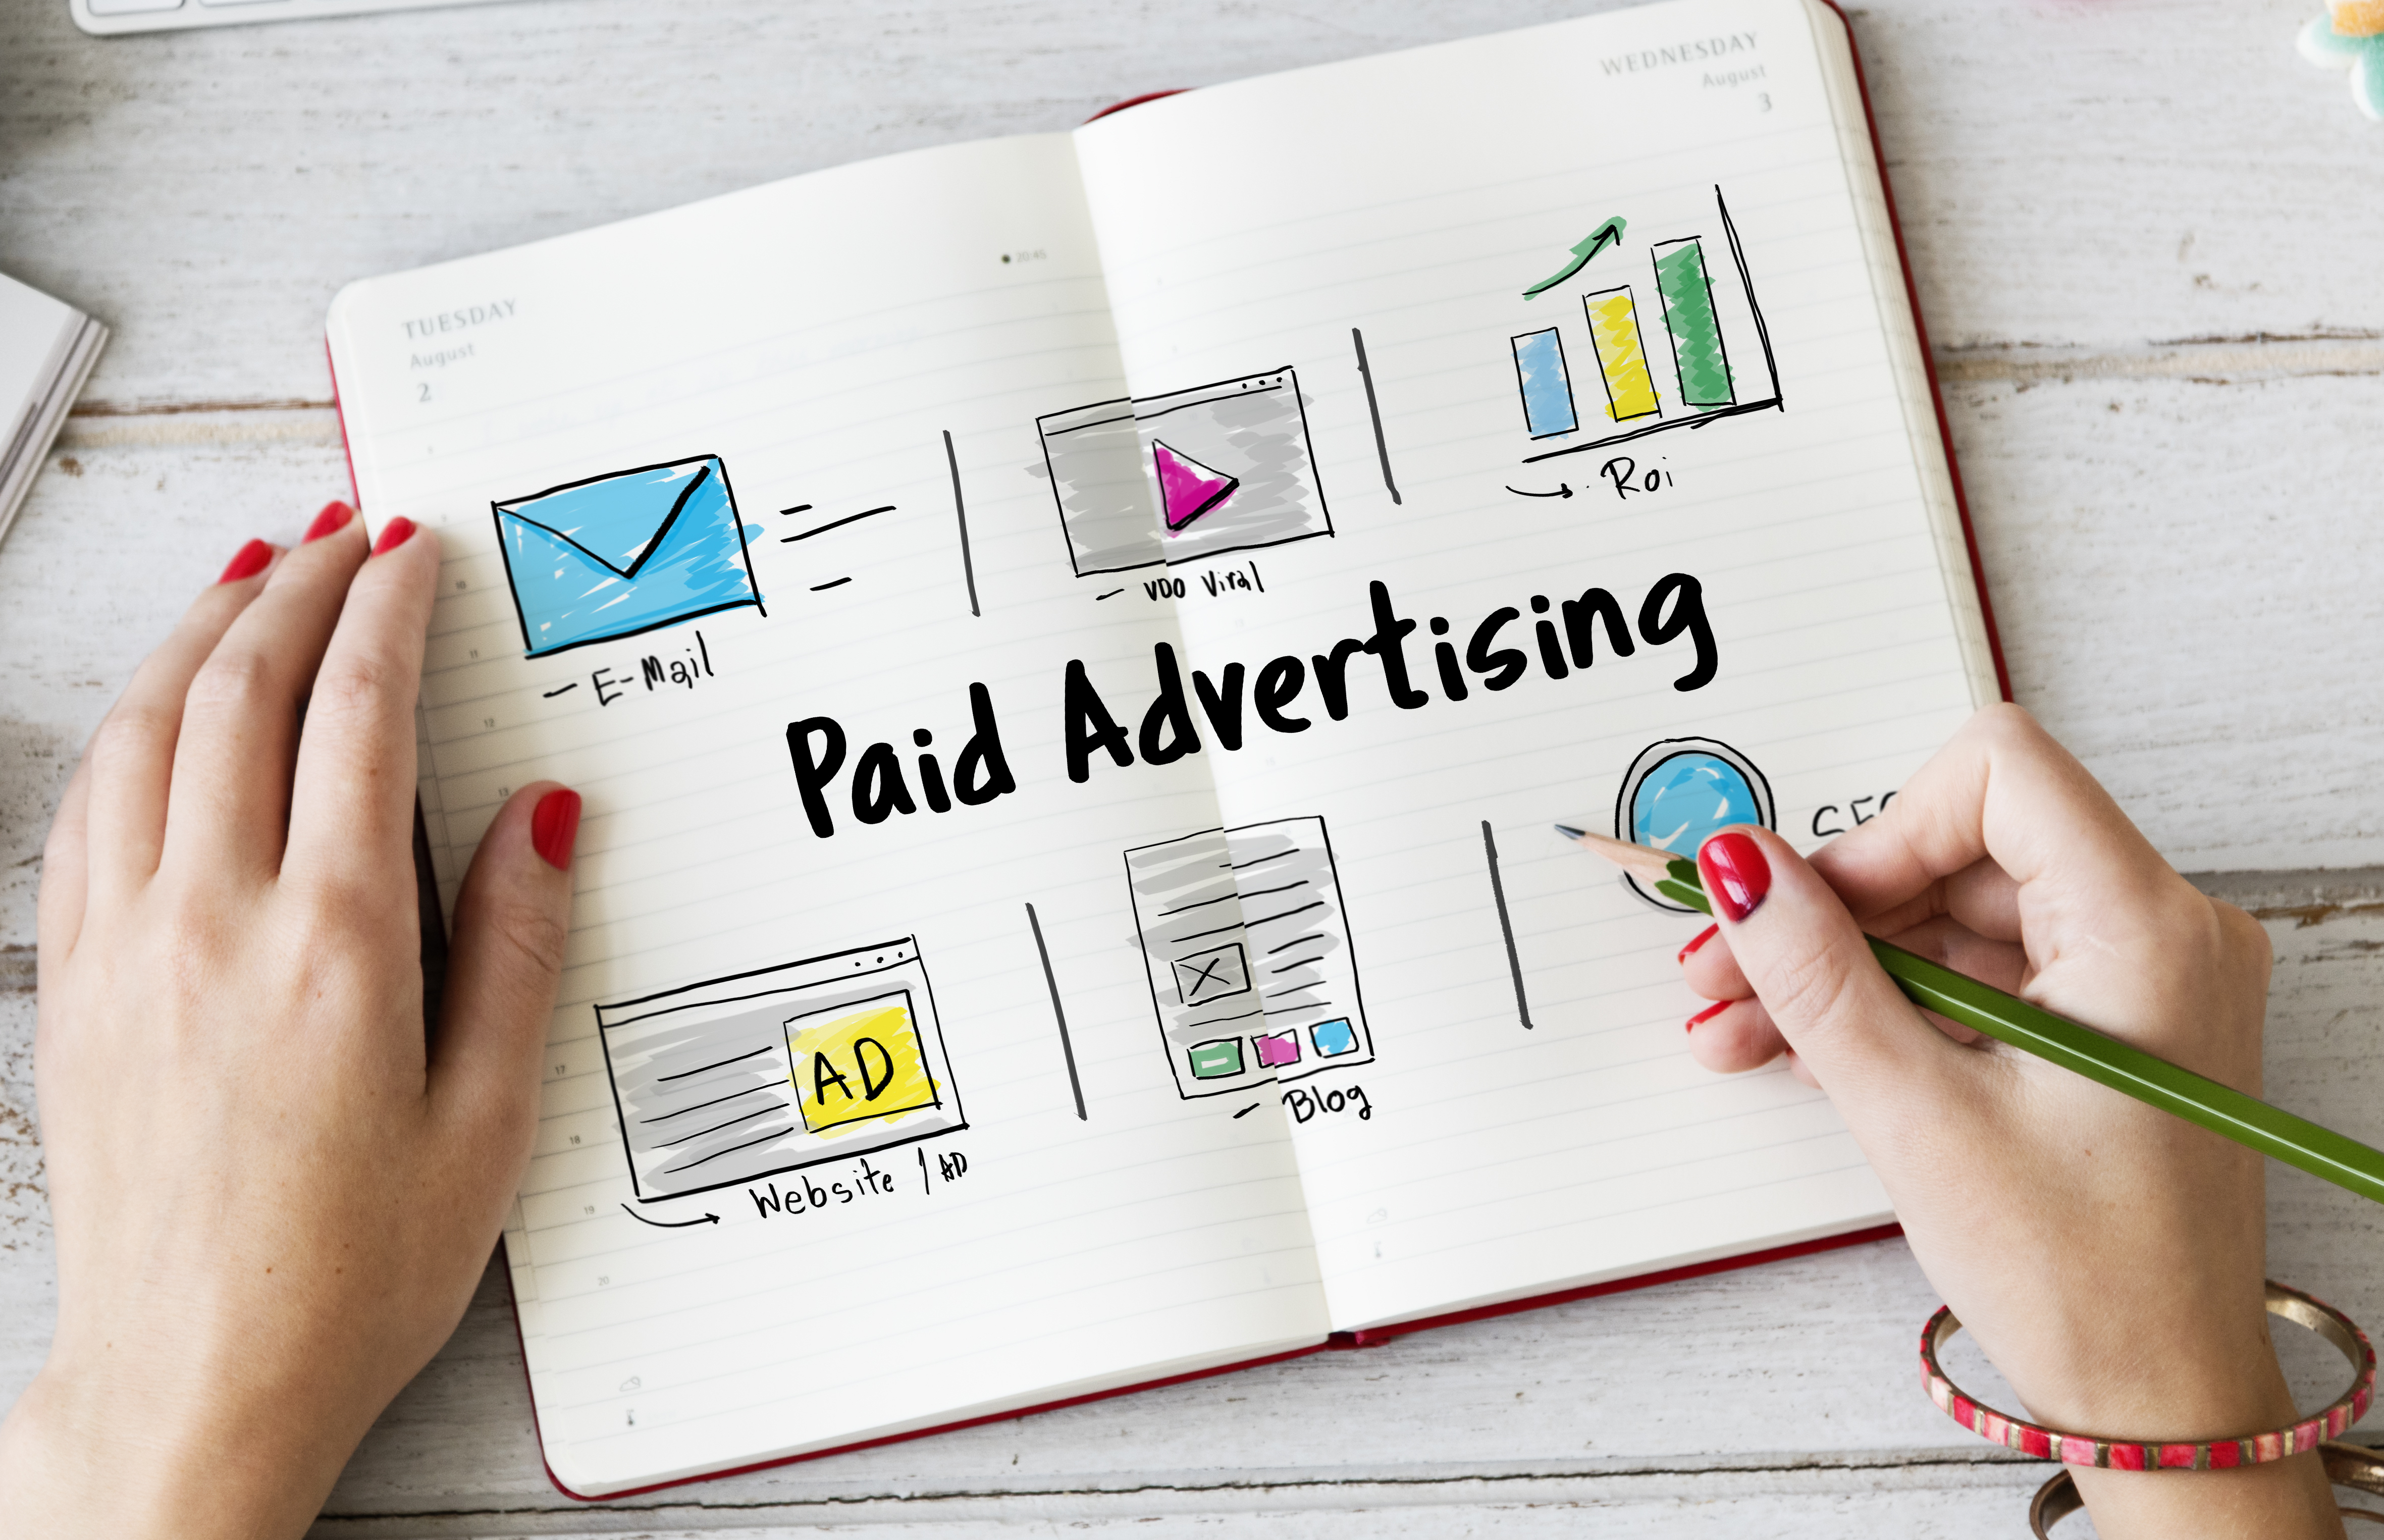 Use Paid Advertising to Boost Your Visibility